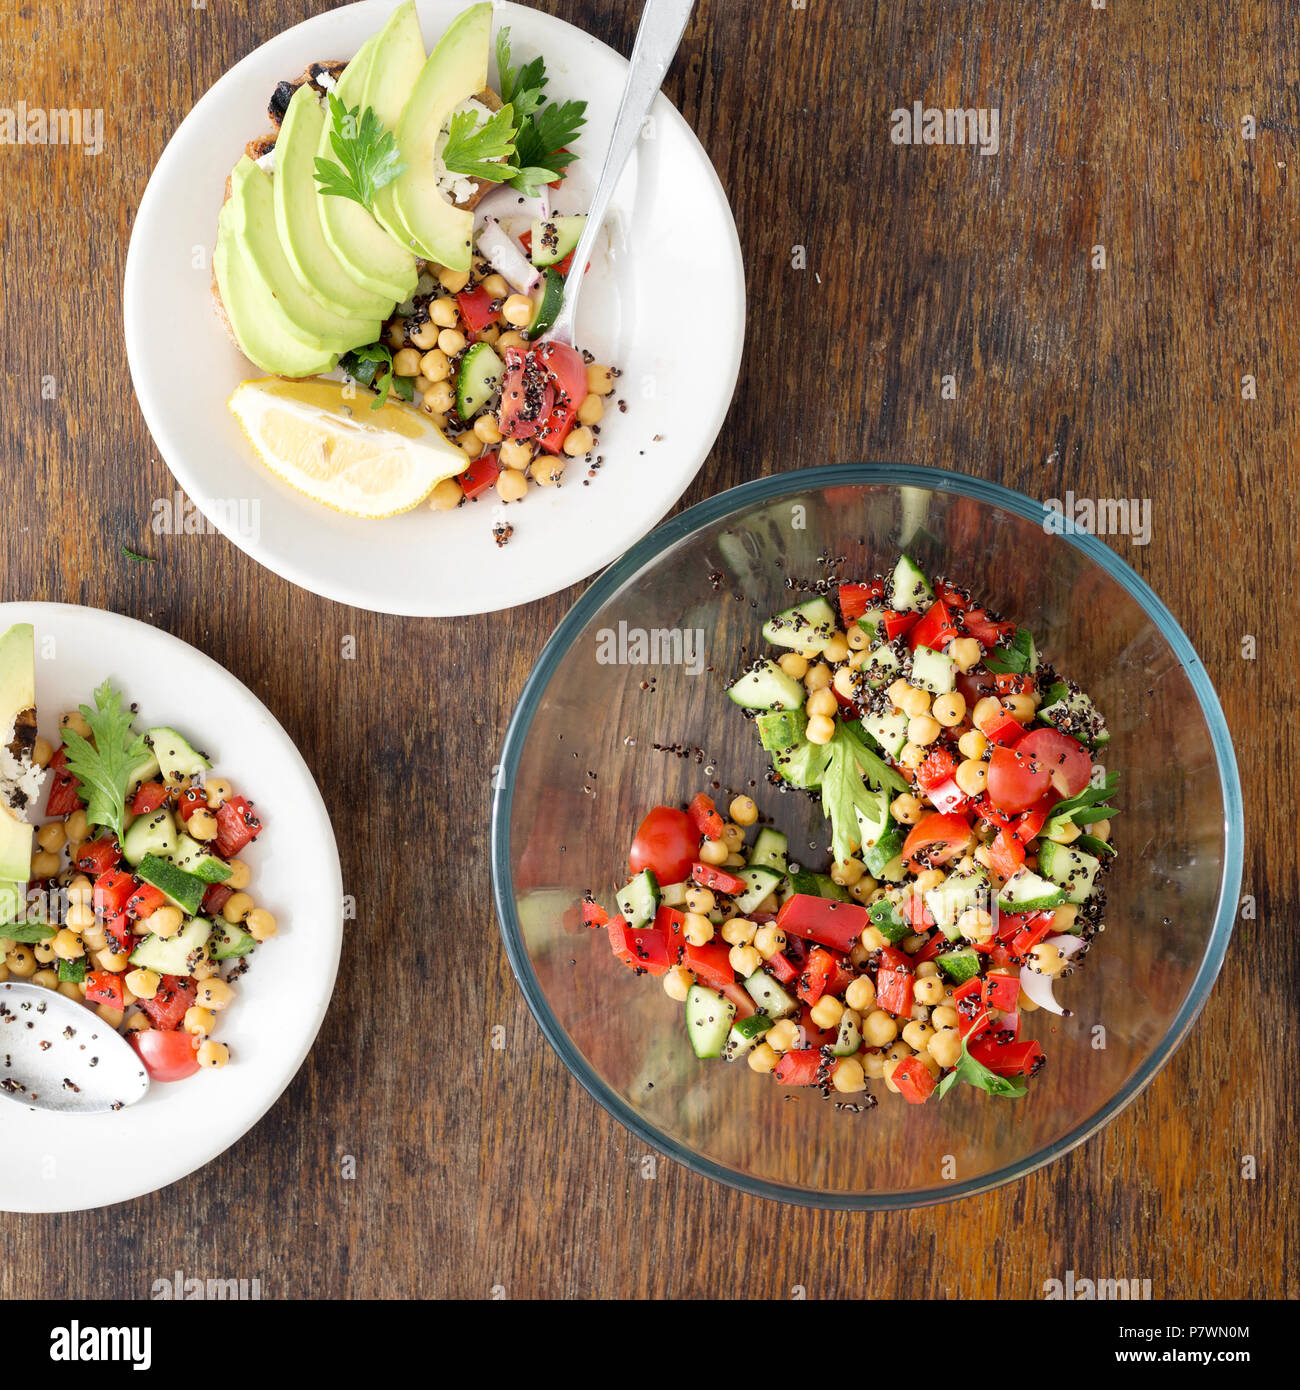 Tasty and healthy vegetarian food. Salad of black quinoa, chickpeas and vegetables with avocado bruschetta on wooden table, top view Stock Photo